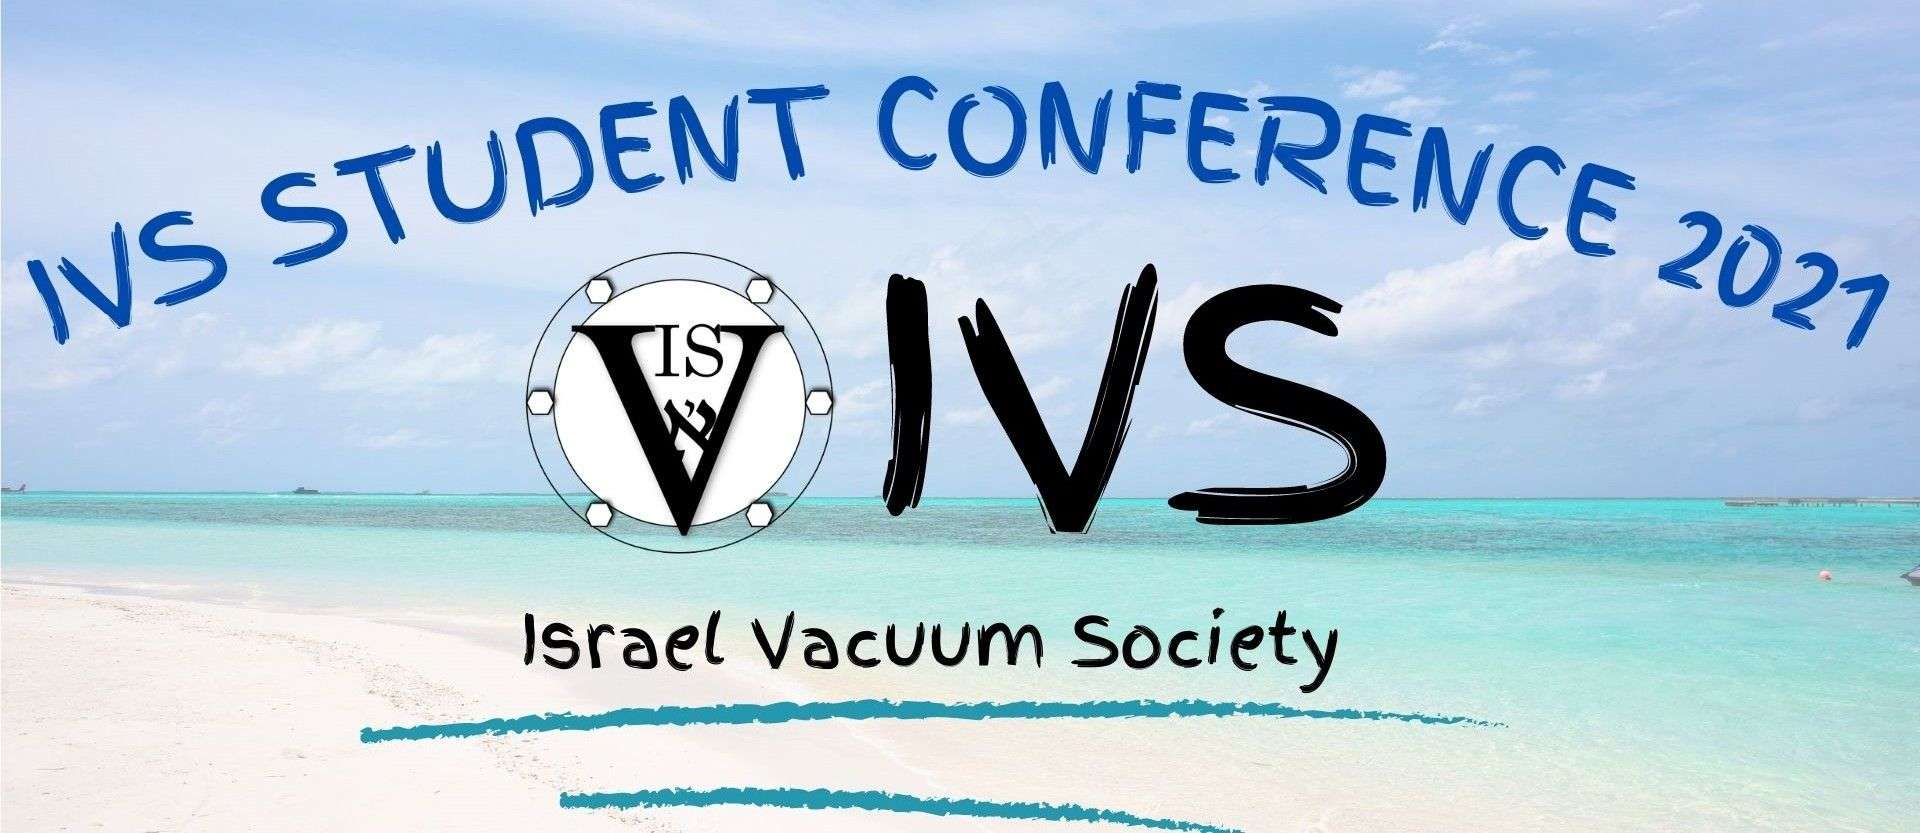 Professor Yury Gogotsi Will Be Giving The Closing Plenary Lecture For The IVS Student Conference